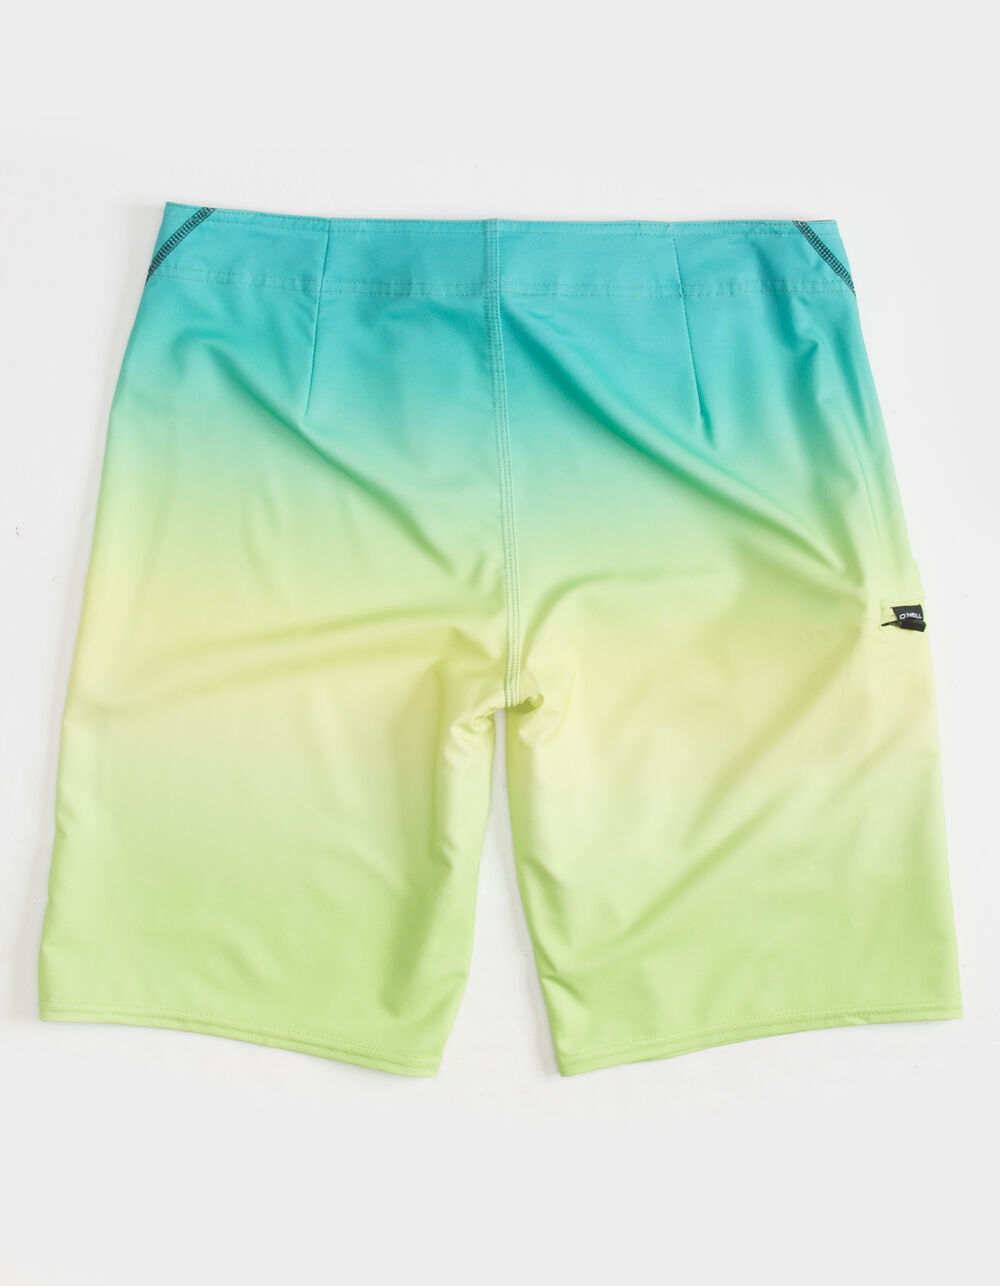 O'NEILL S Seam Mens Lime Boardshorts - LIME | Tillys